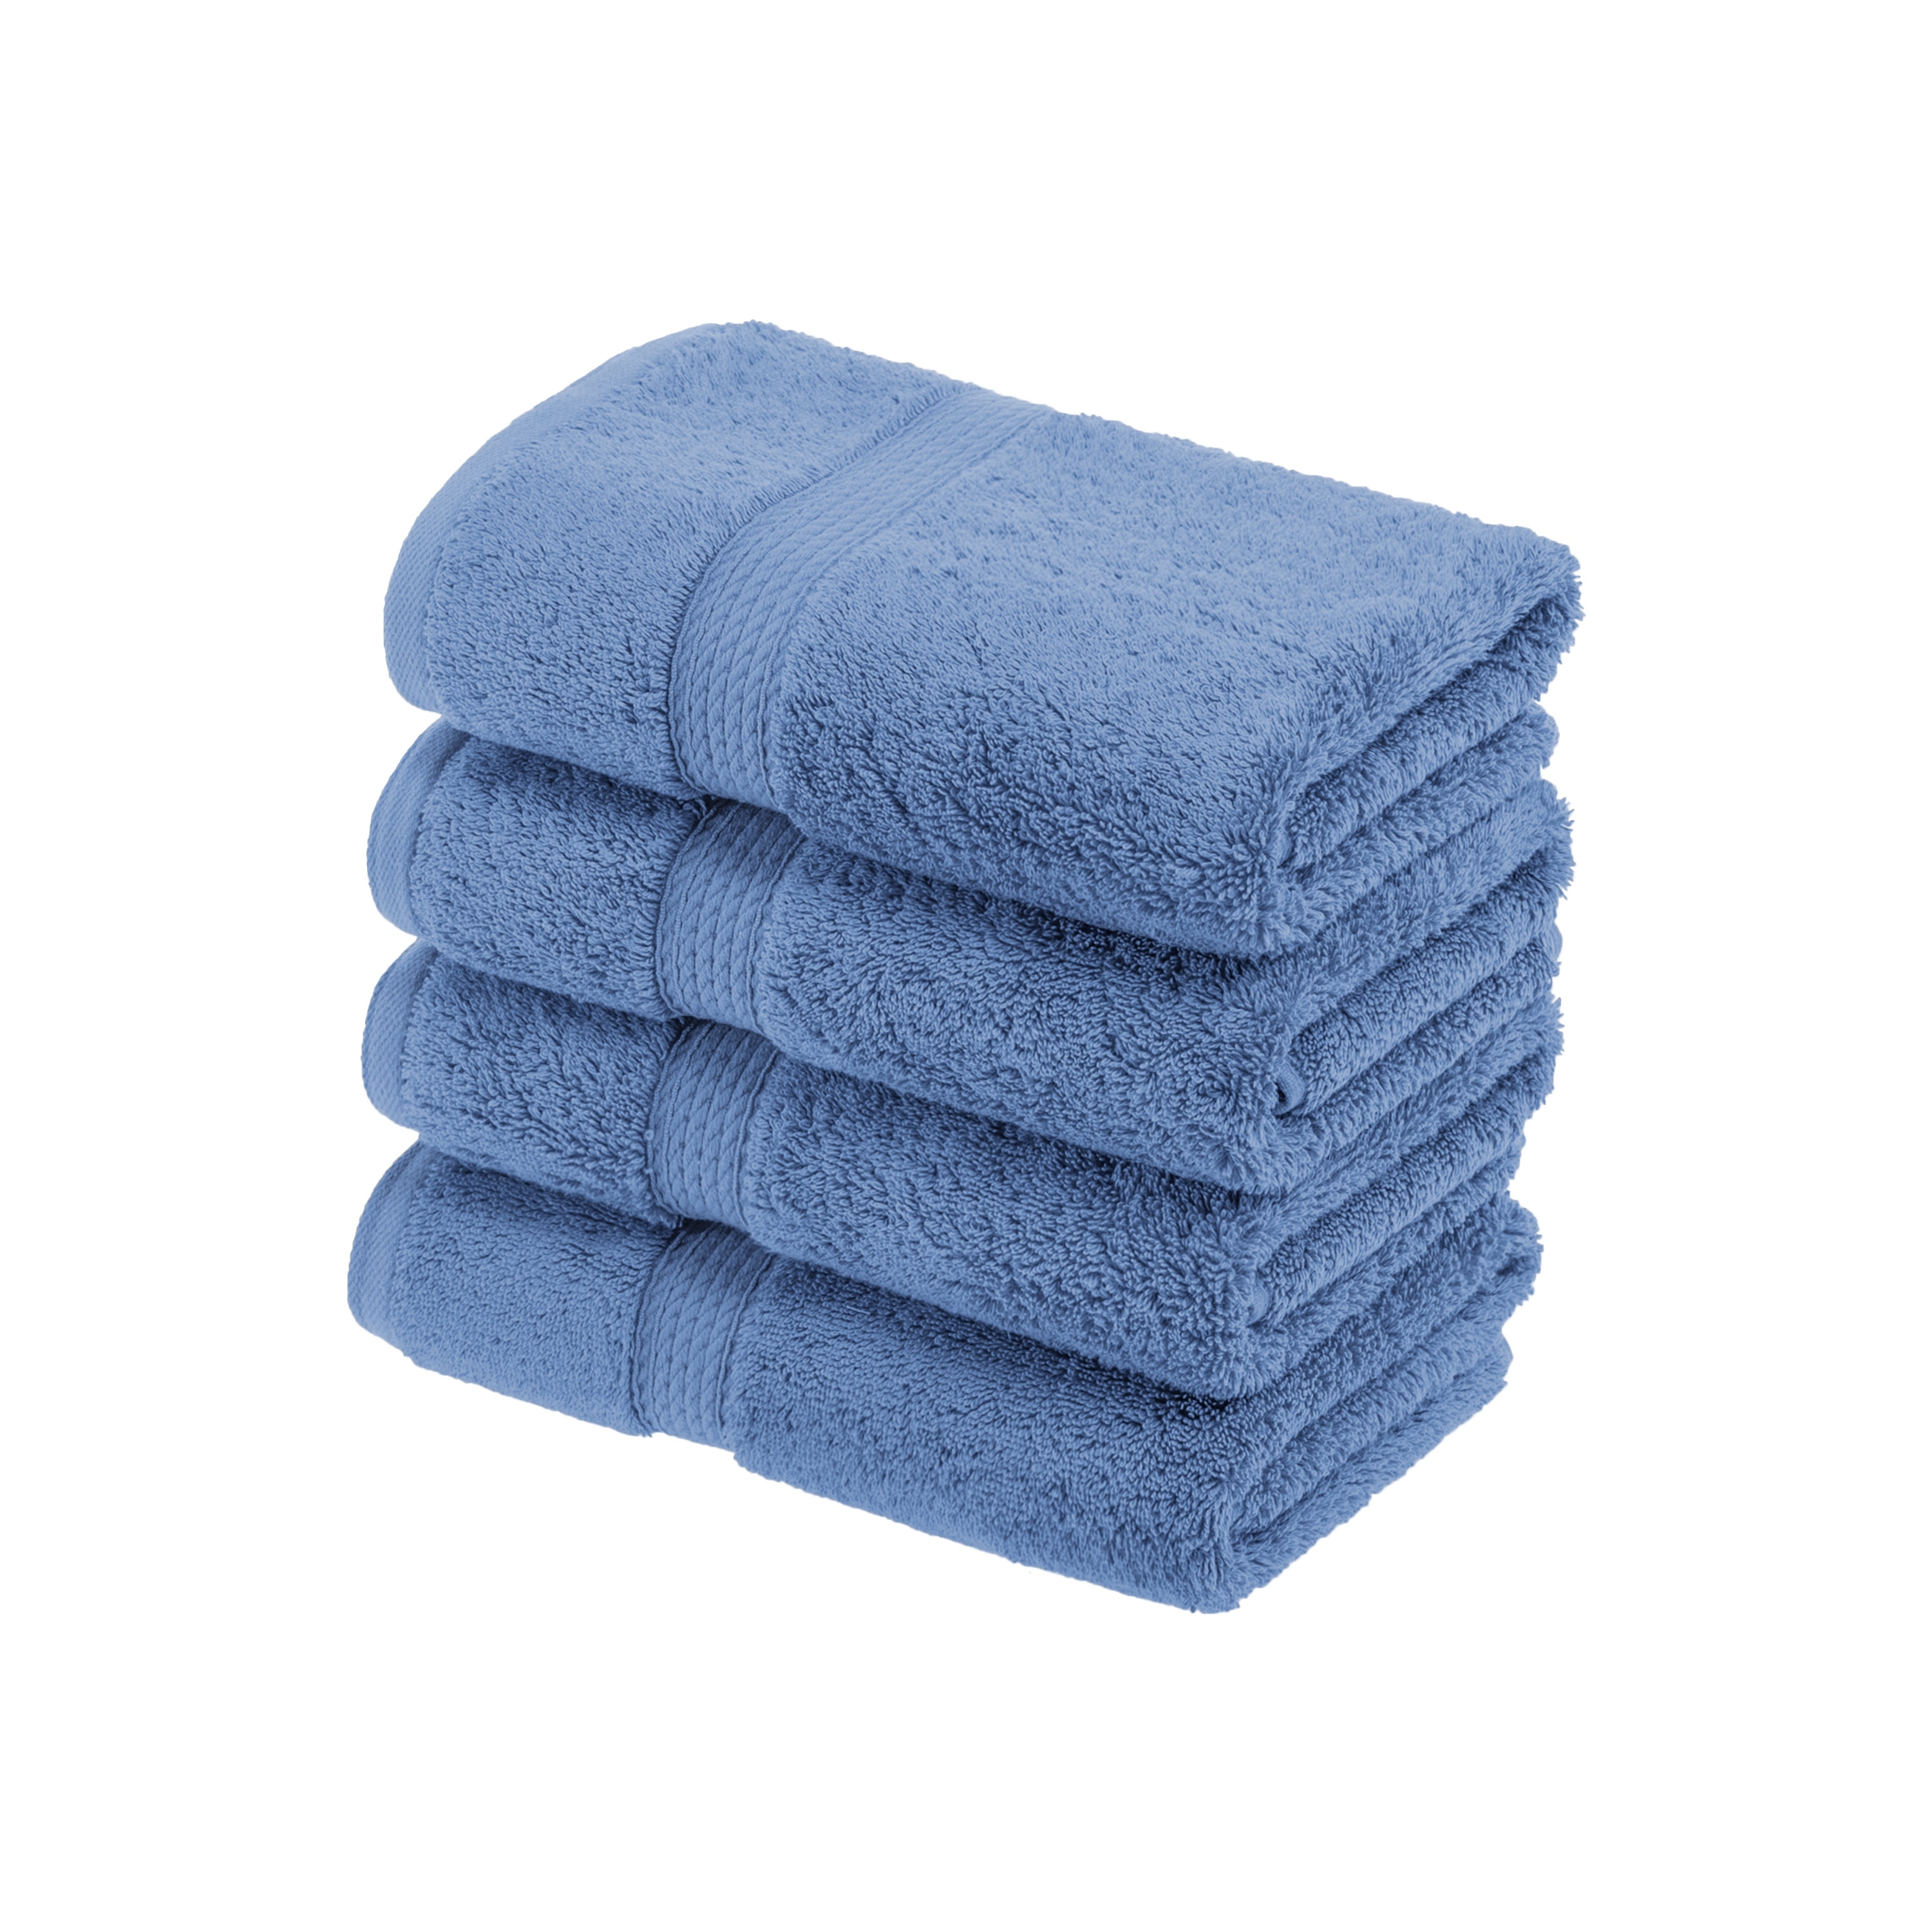 Cannon Egyptian Cotton Towel in Colors - Hotel Supplies